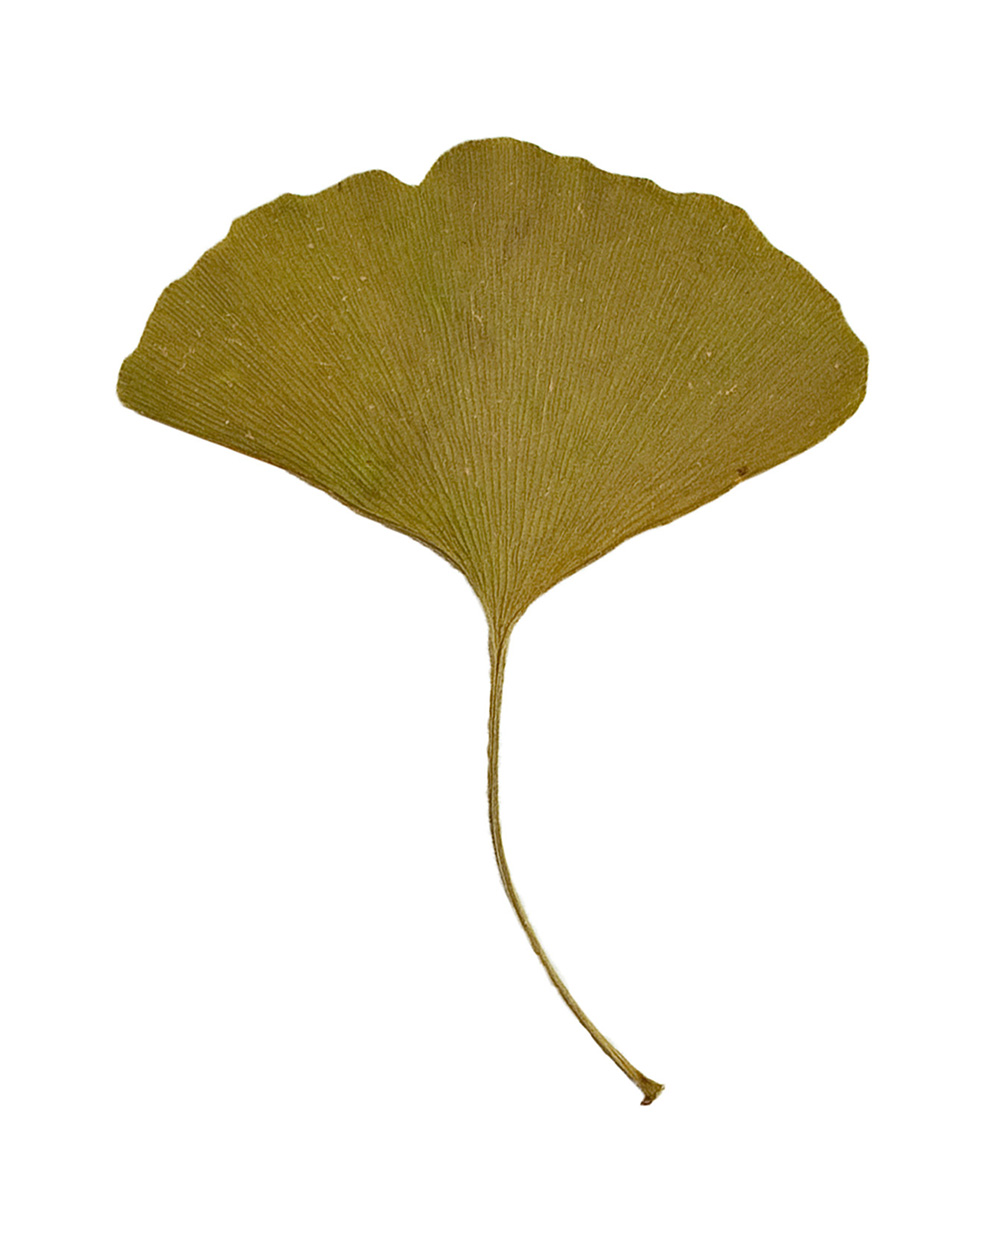 Ginkgo - The Diggers Club